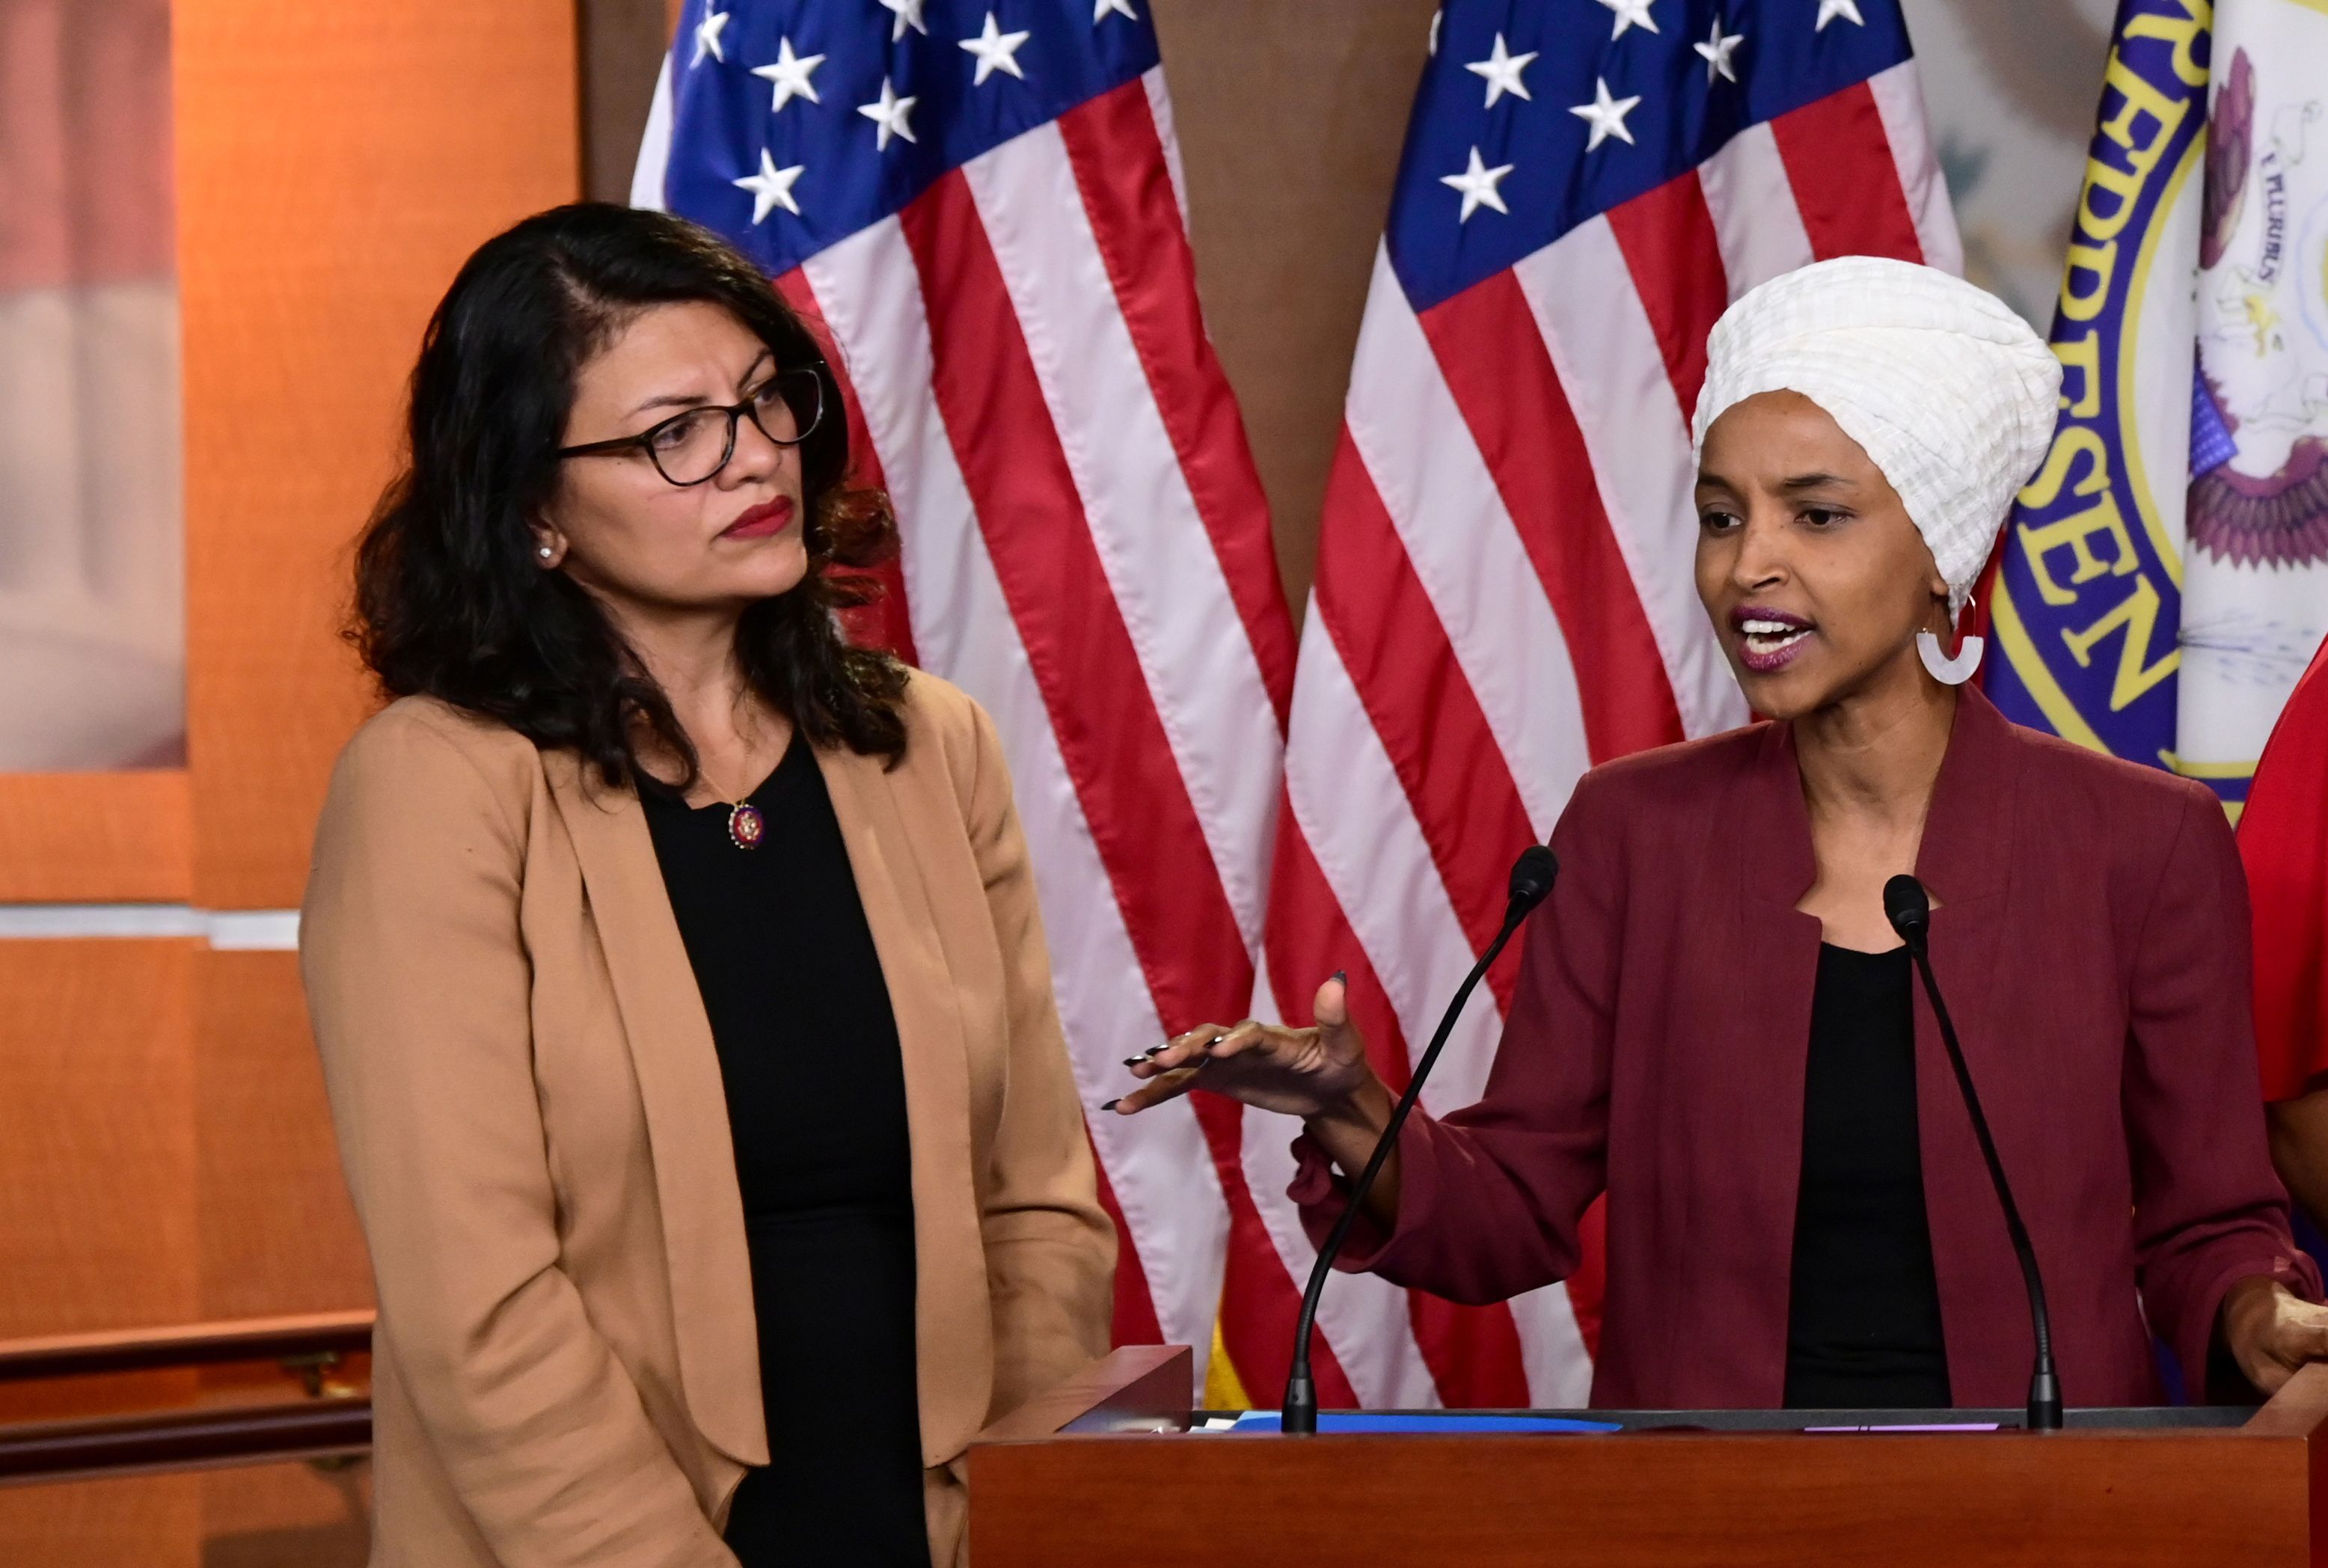 Israel bars Democrats Tlaib and Omar after Trump claims they hate 'all Jewish people'